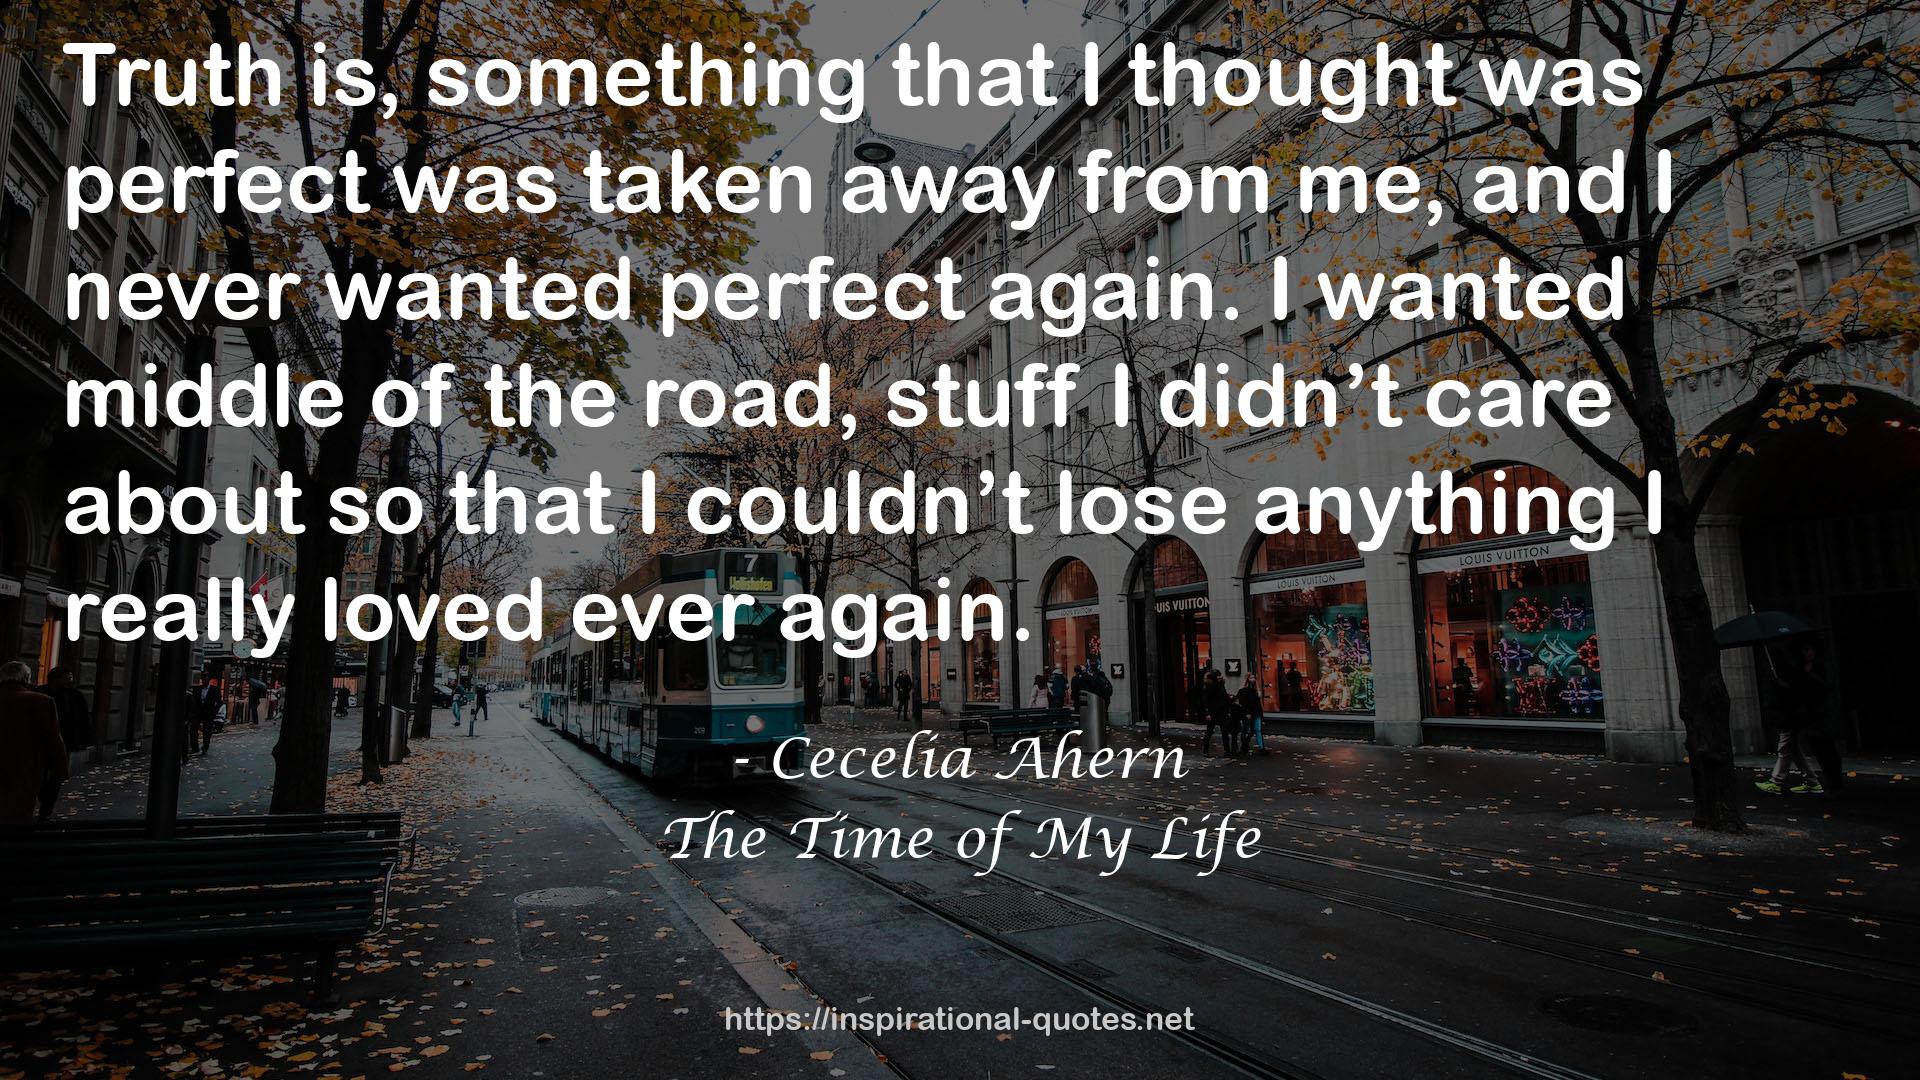 The Time of My Life QUOTES